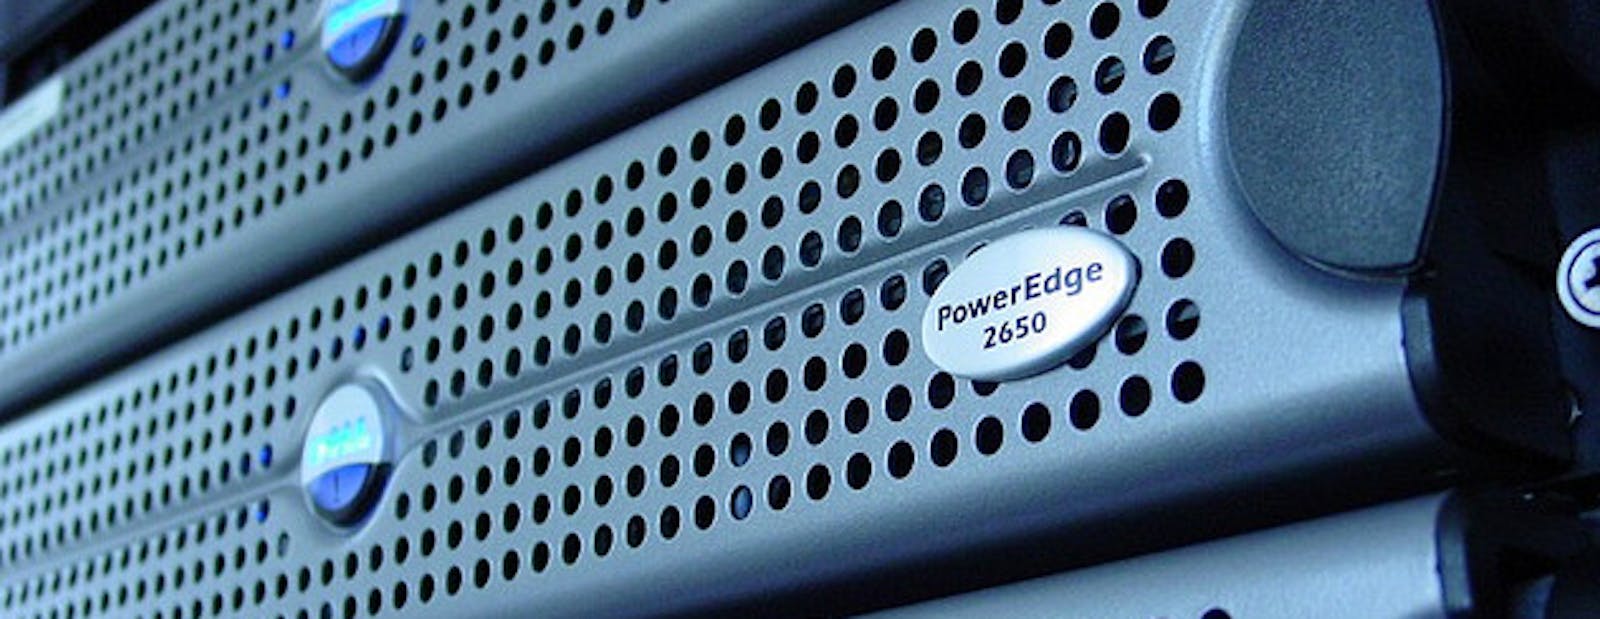 Everything you need to know about Dedicated Server Hosting.